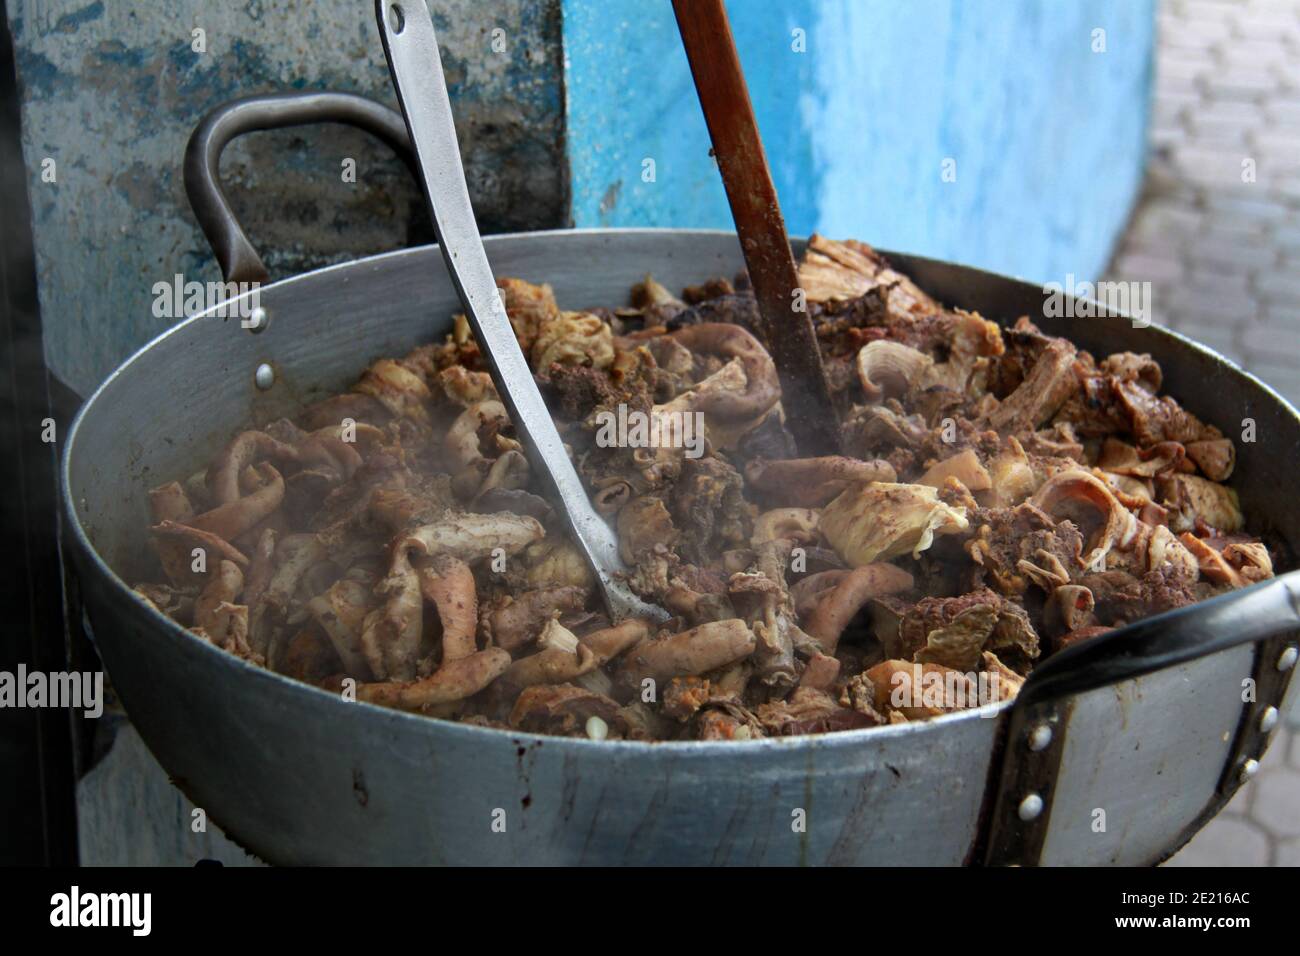 Typical meat dish for sale at the Otavalo market in Ecuador Stock Photo